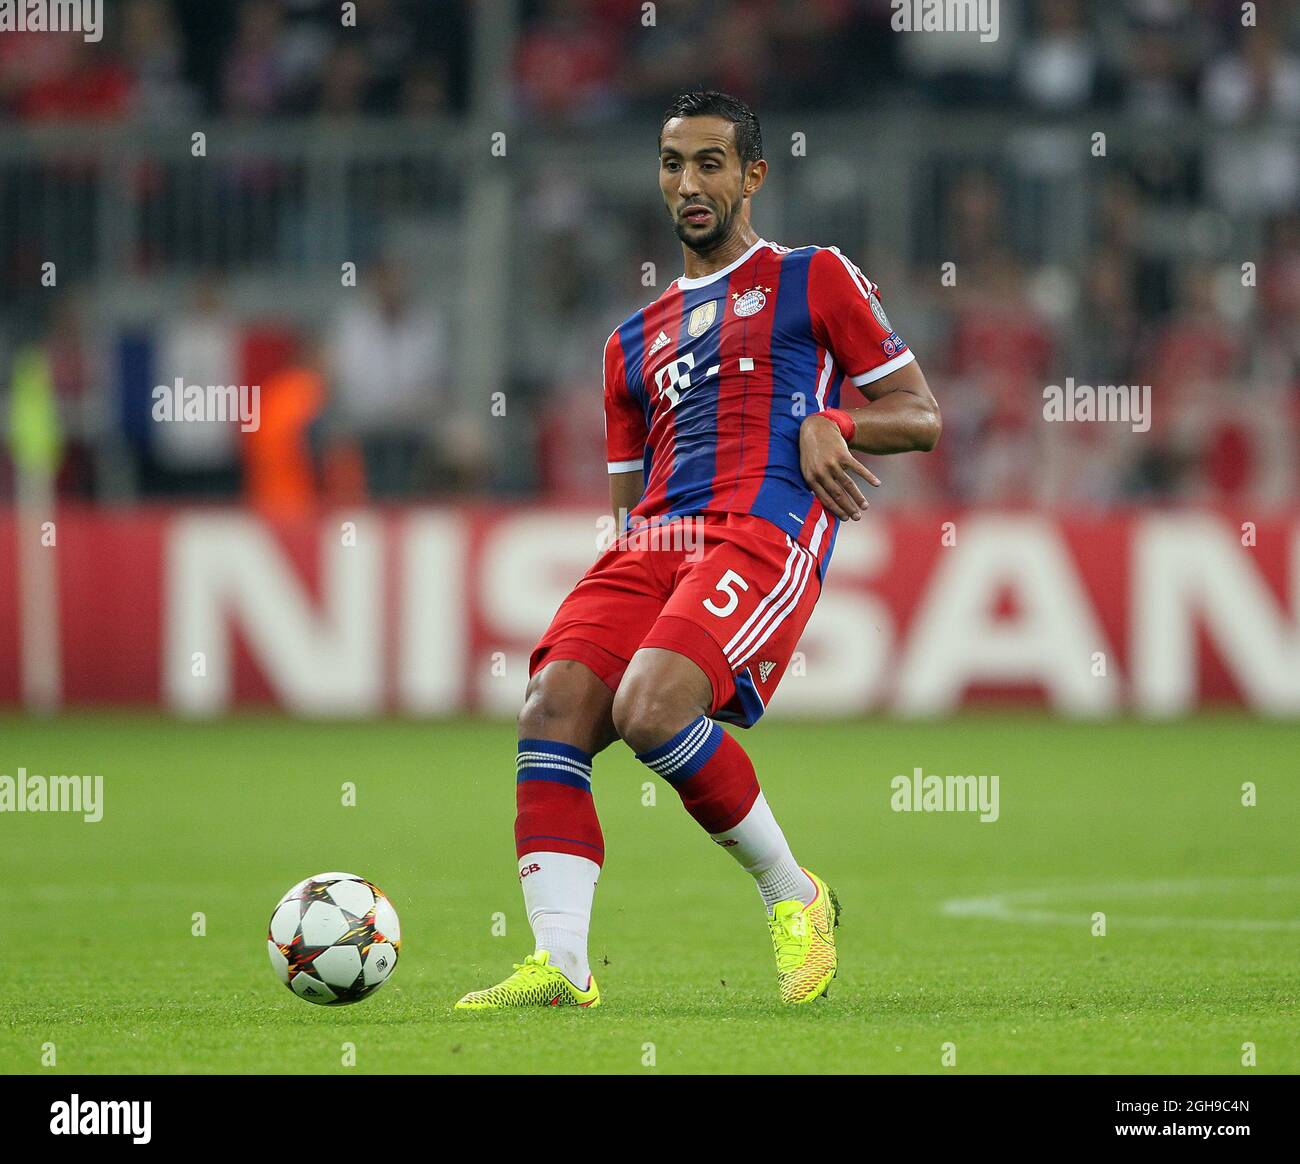 Bayern Munich's Mehdi Benatia in action during the Champions League Group E match between Bayern Munich and Manchester City held at Allianz Arena in Germany on Sept. 17, 2014 . Stock Photo